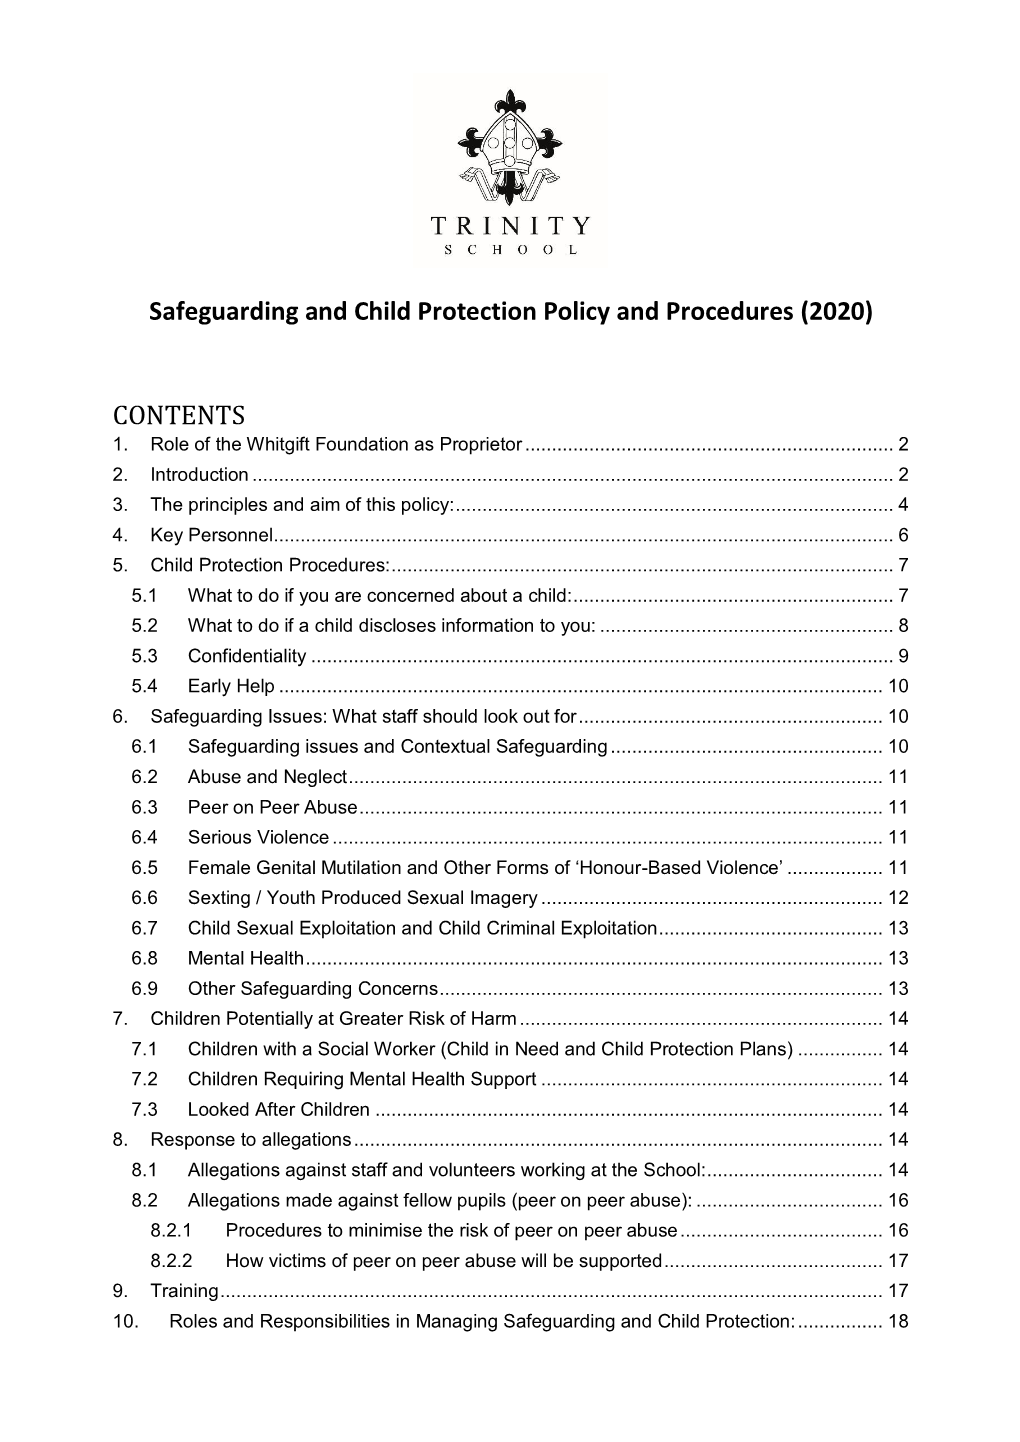 Safeguarding and Child Protection Policy and Procedures (2020)